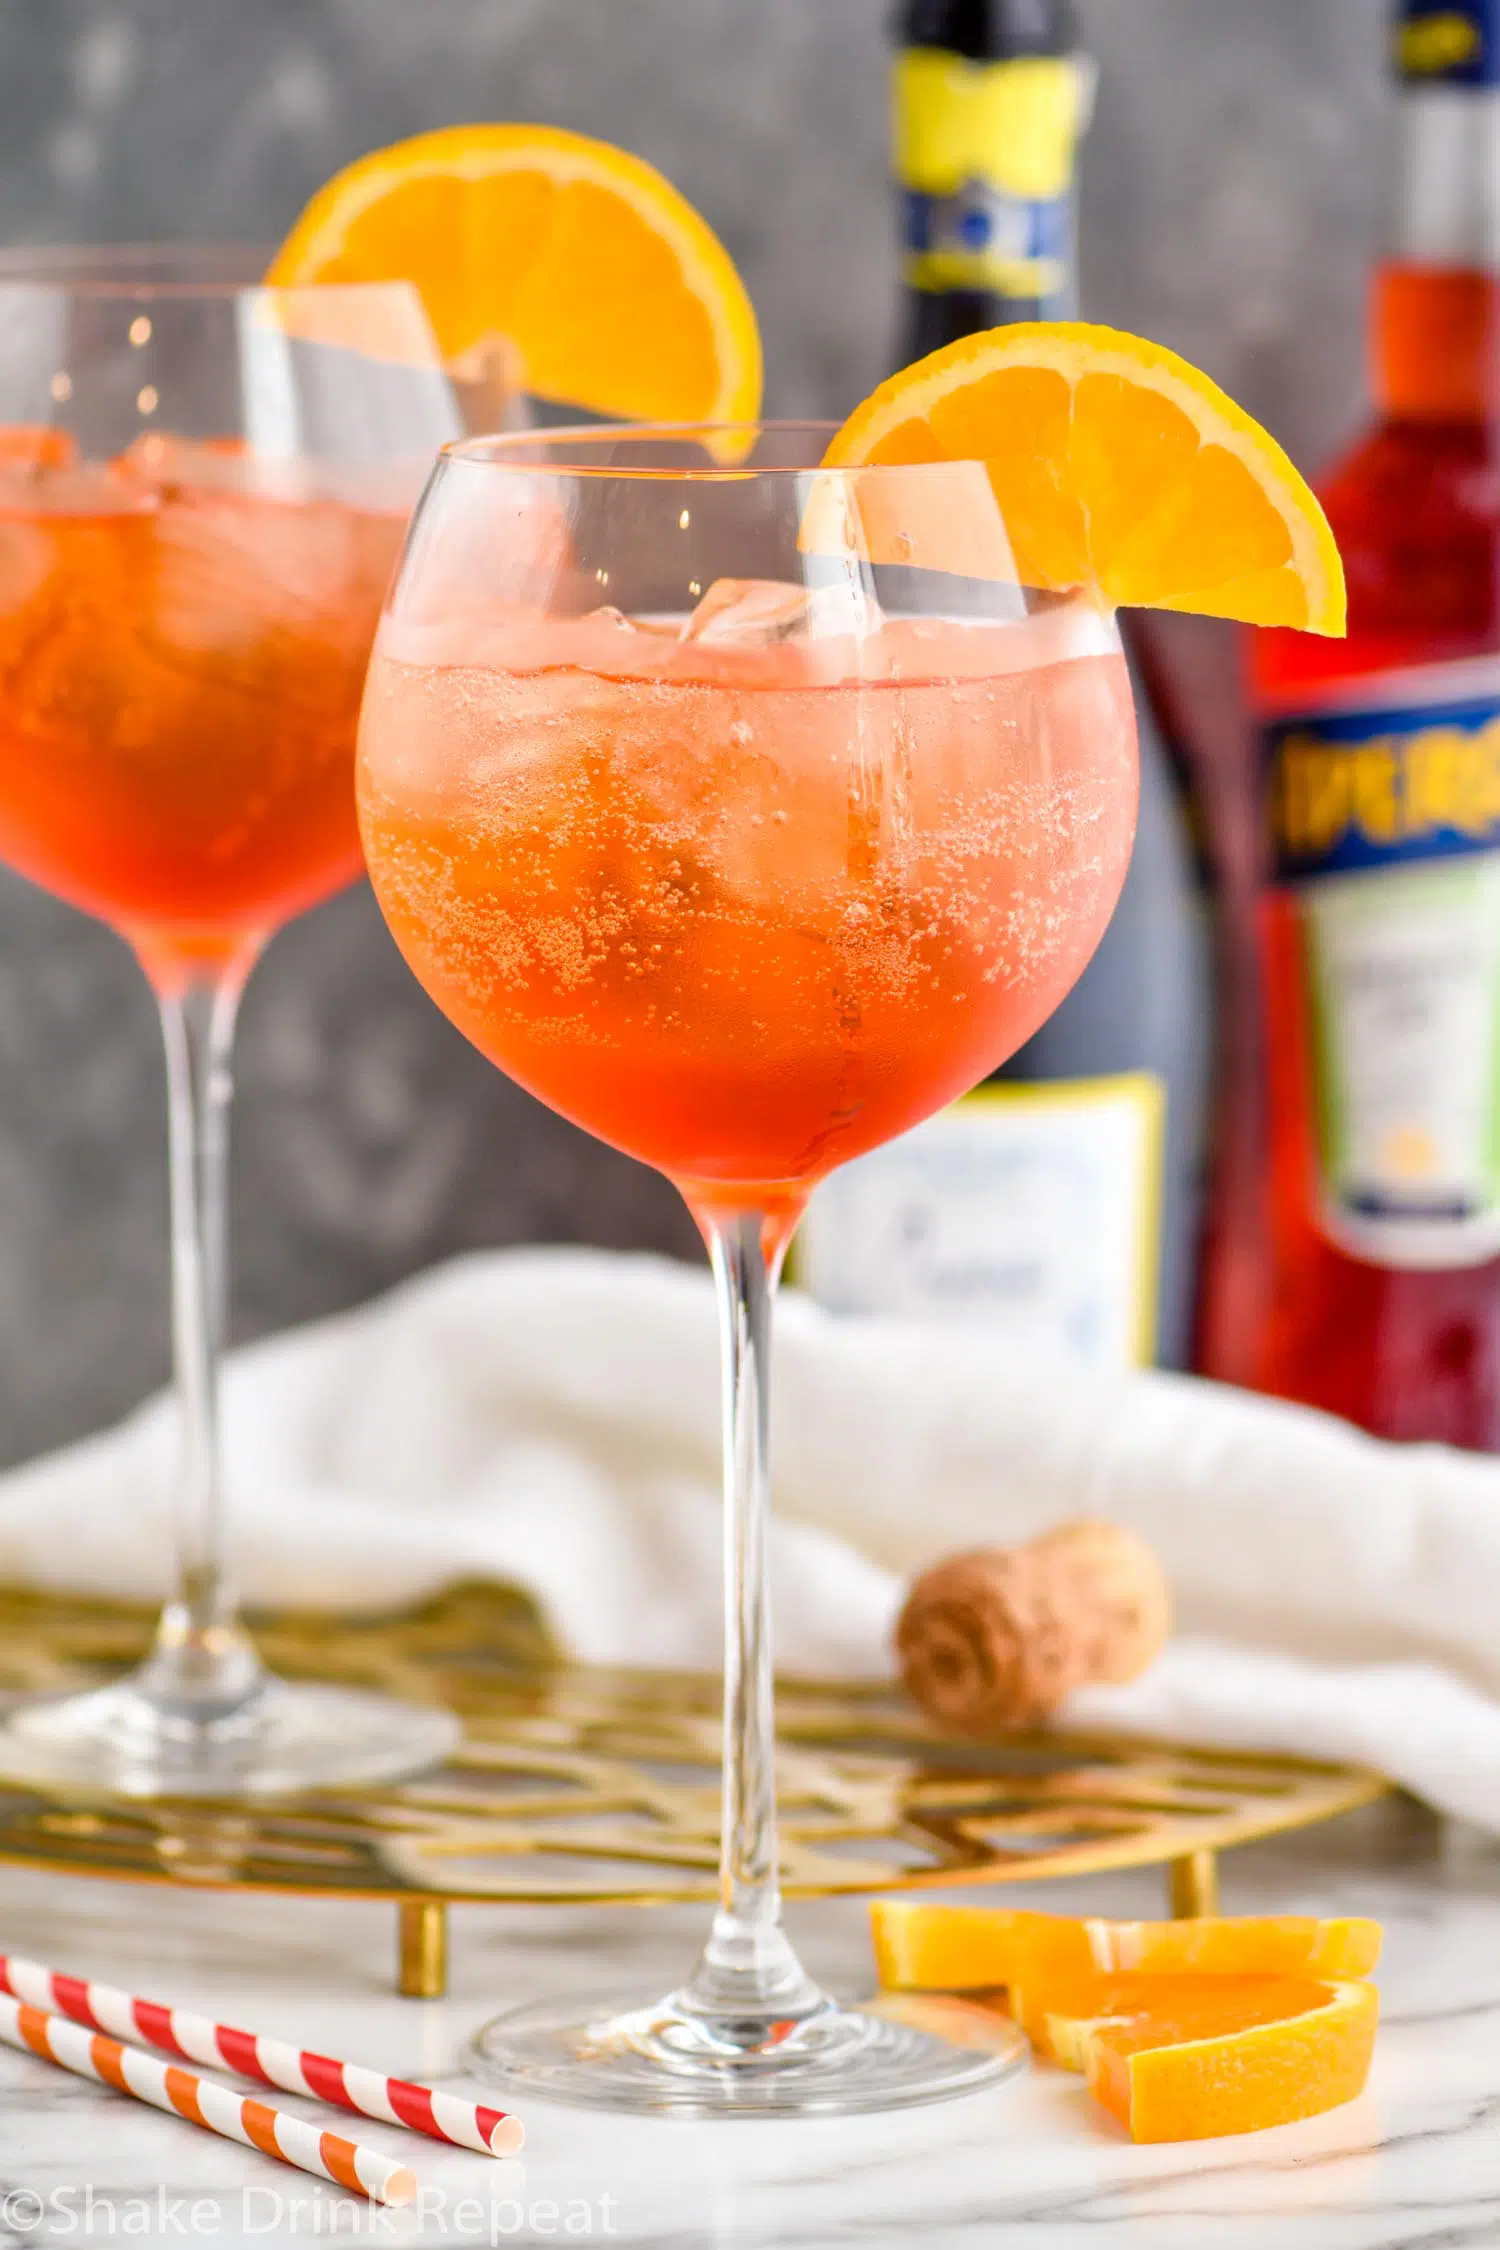 two glasses of aperol spritz with ice and orange slices surrounded by straws, a bottle of sparkling wine, and a bottle of aperol